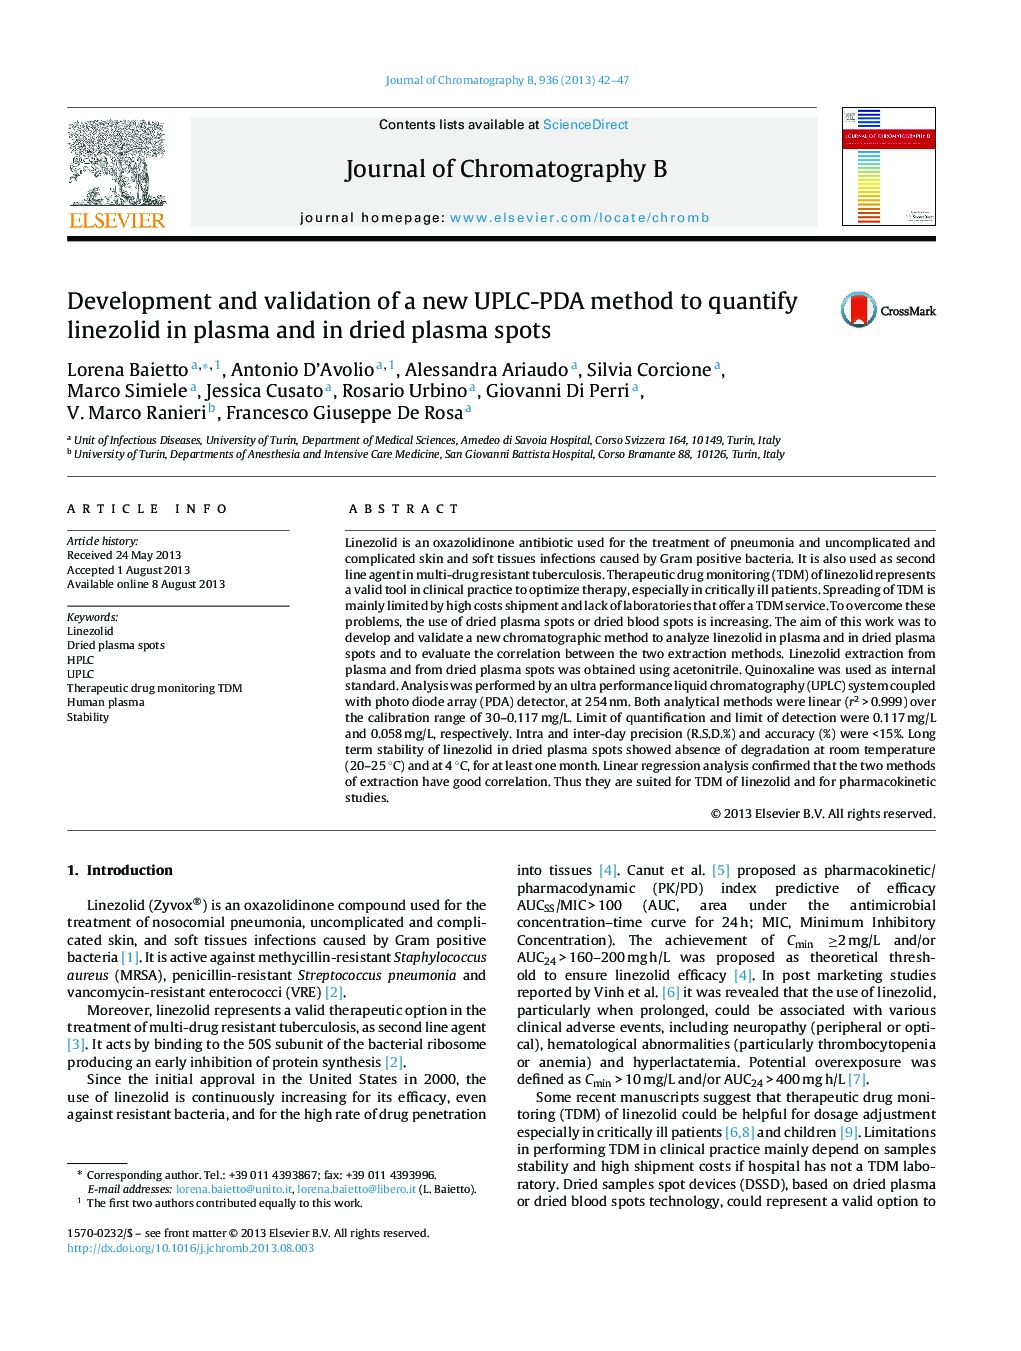 Development and validation of a new UPLC-PDA method to quantify linezolid in plasma and in dried plasma spots